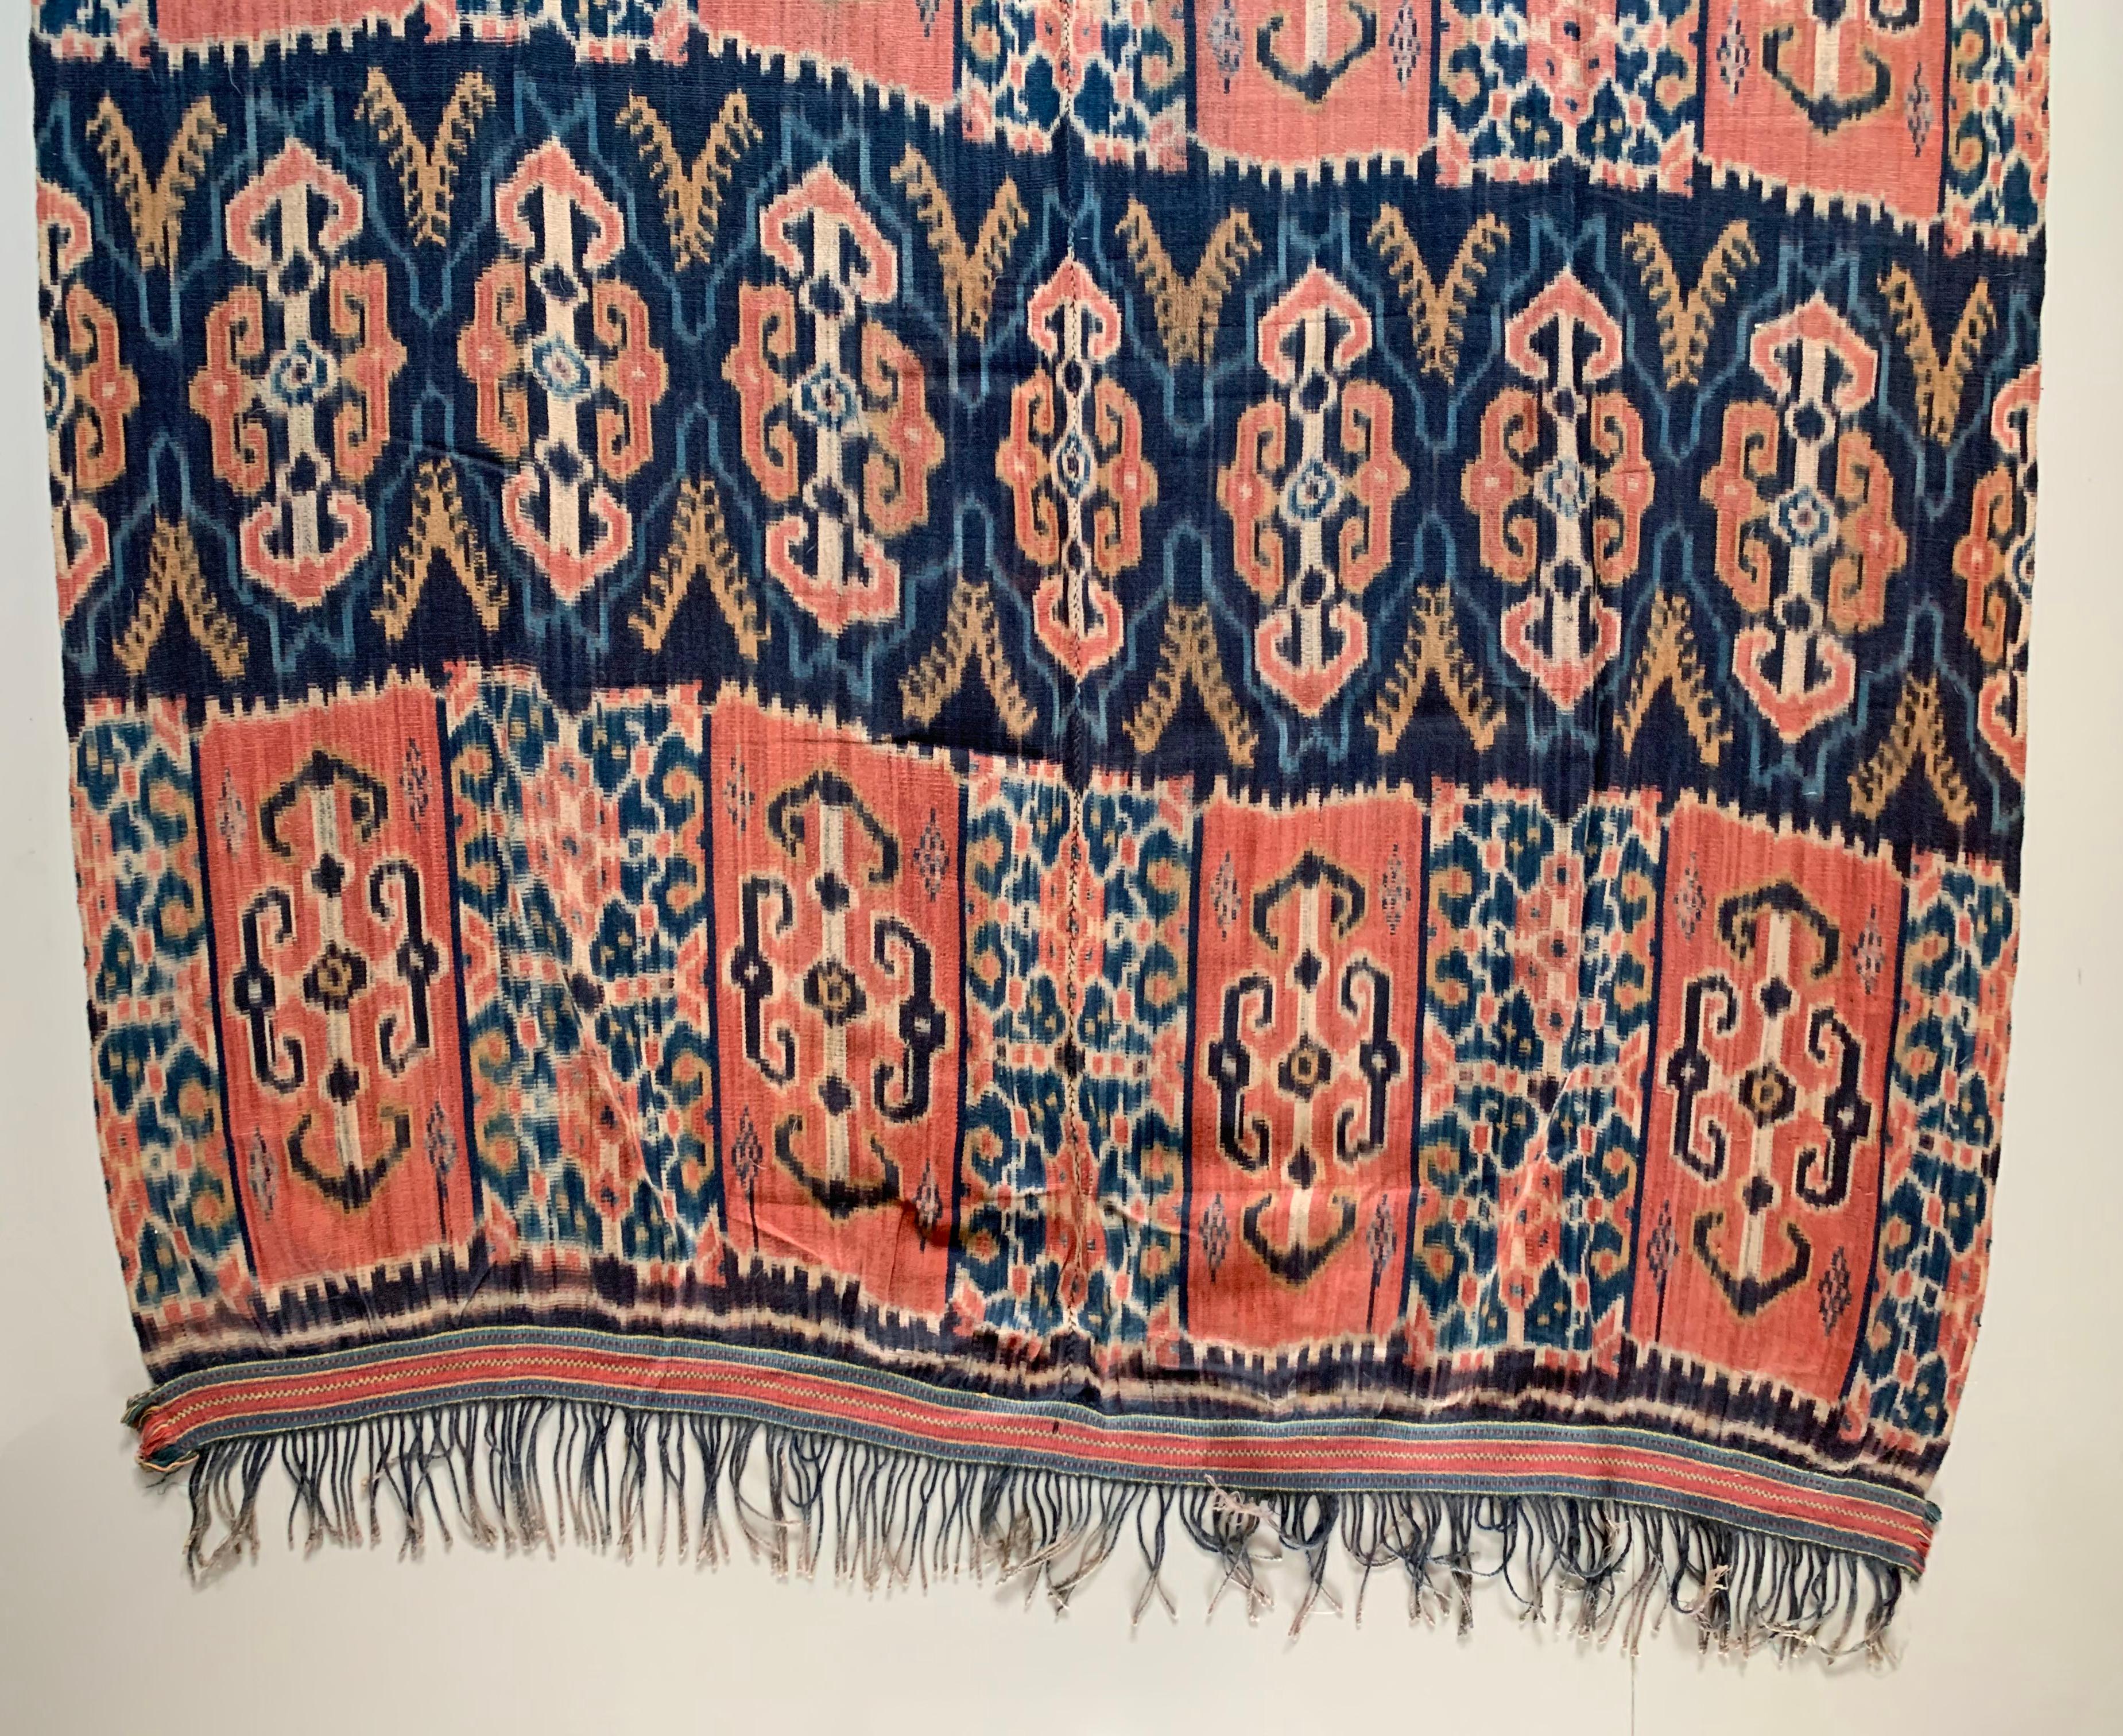 This Ikat textile originates from the Island of Sumba, Indonesia. It is hand-woven using naturally dyed yarns via a method passed on through generations. It features a stunning array of distinct tribal patterns. 

This is an exceptionally long